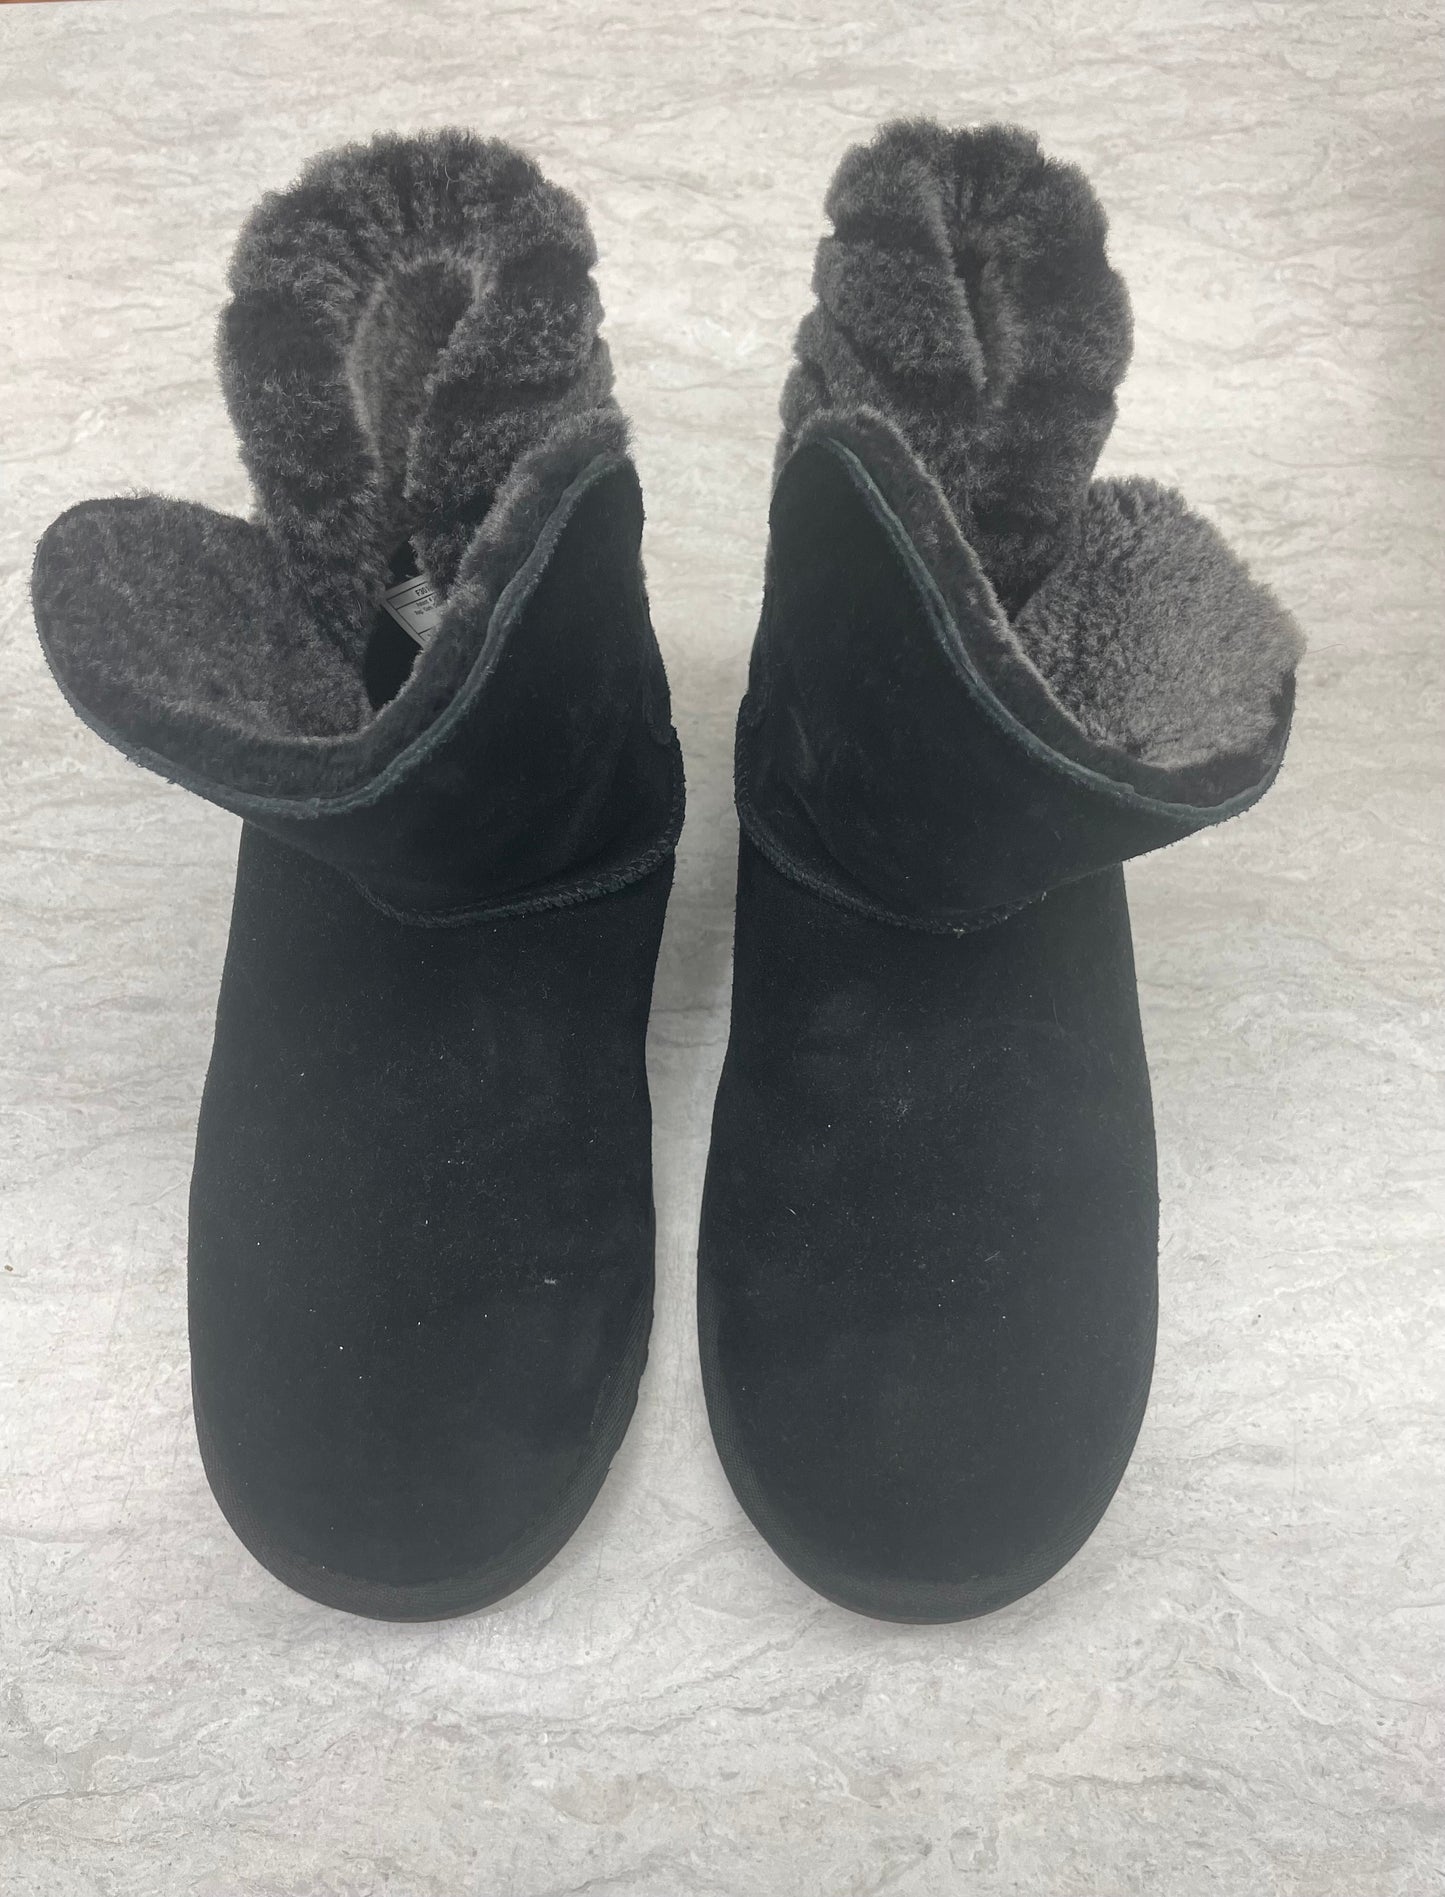 Boots Ankle Flats By Ugg  Size: 10